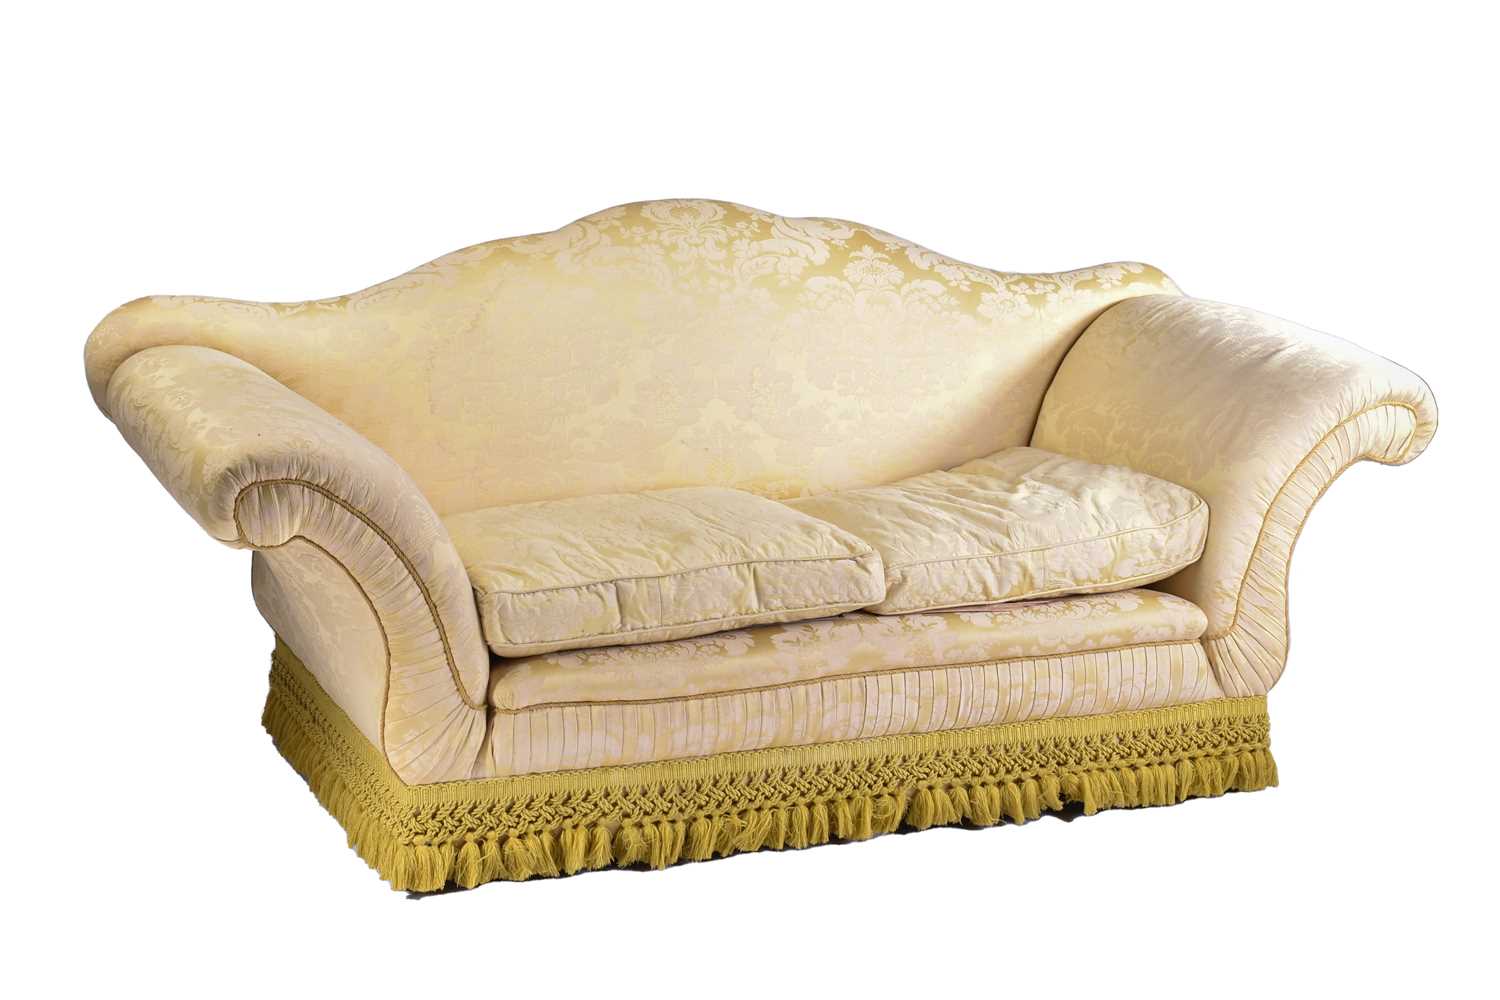 A pair of Harrods camel back two-seat sofas with stuff over pale gold Damask upholstery with - Image 2 of 12